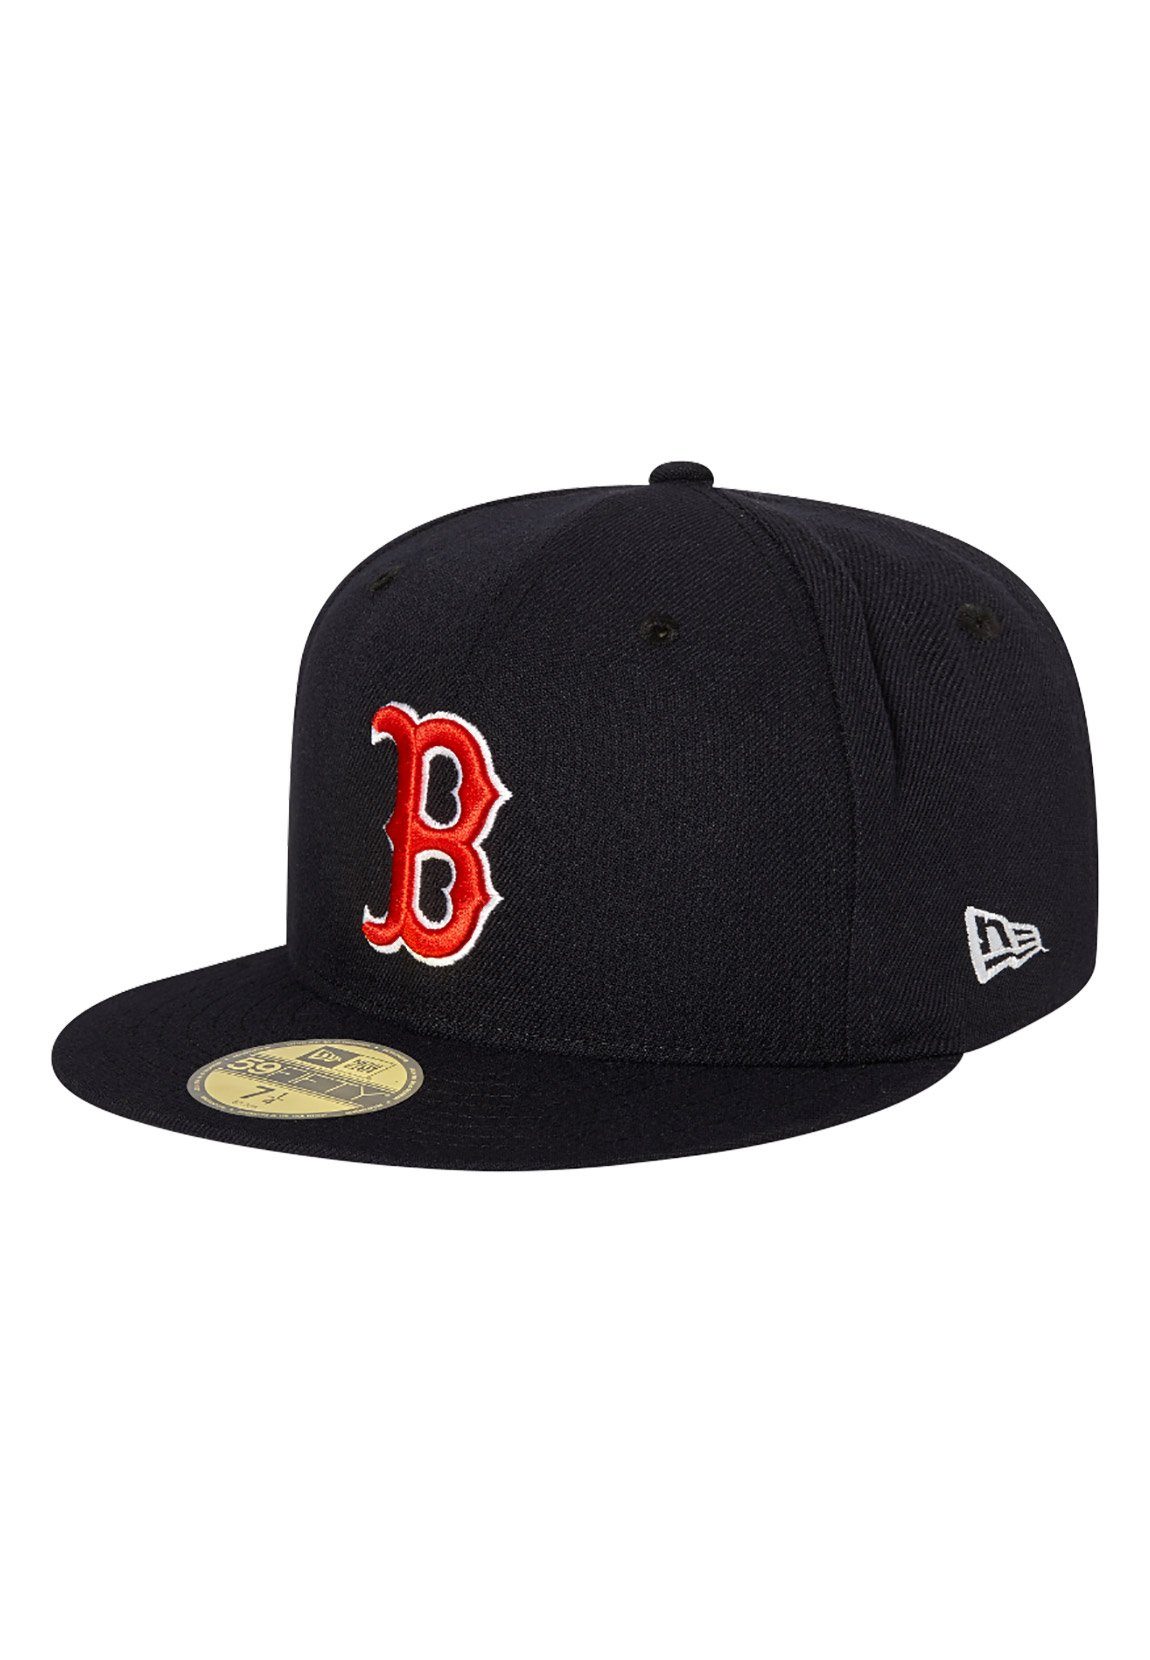 New Fitted Era Cap SOX BOSTON Era RED 59Fifty Fitted Authentics Rot New Dunkelblau Cap